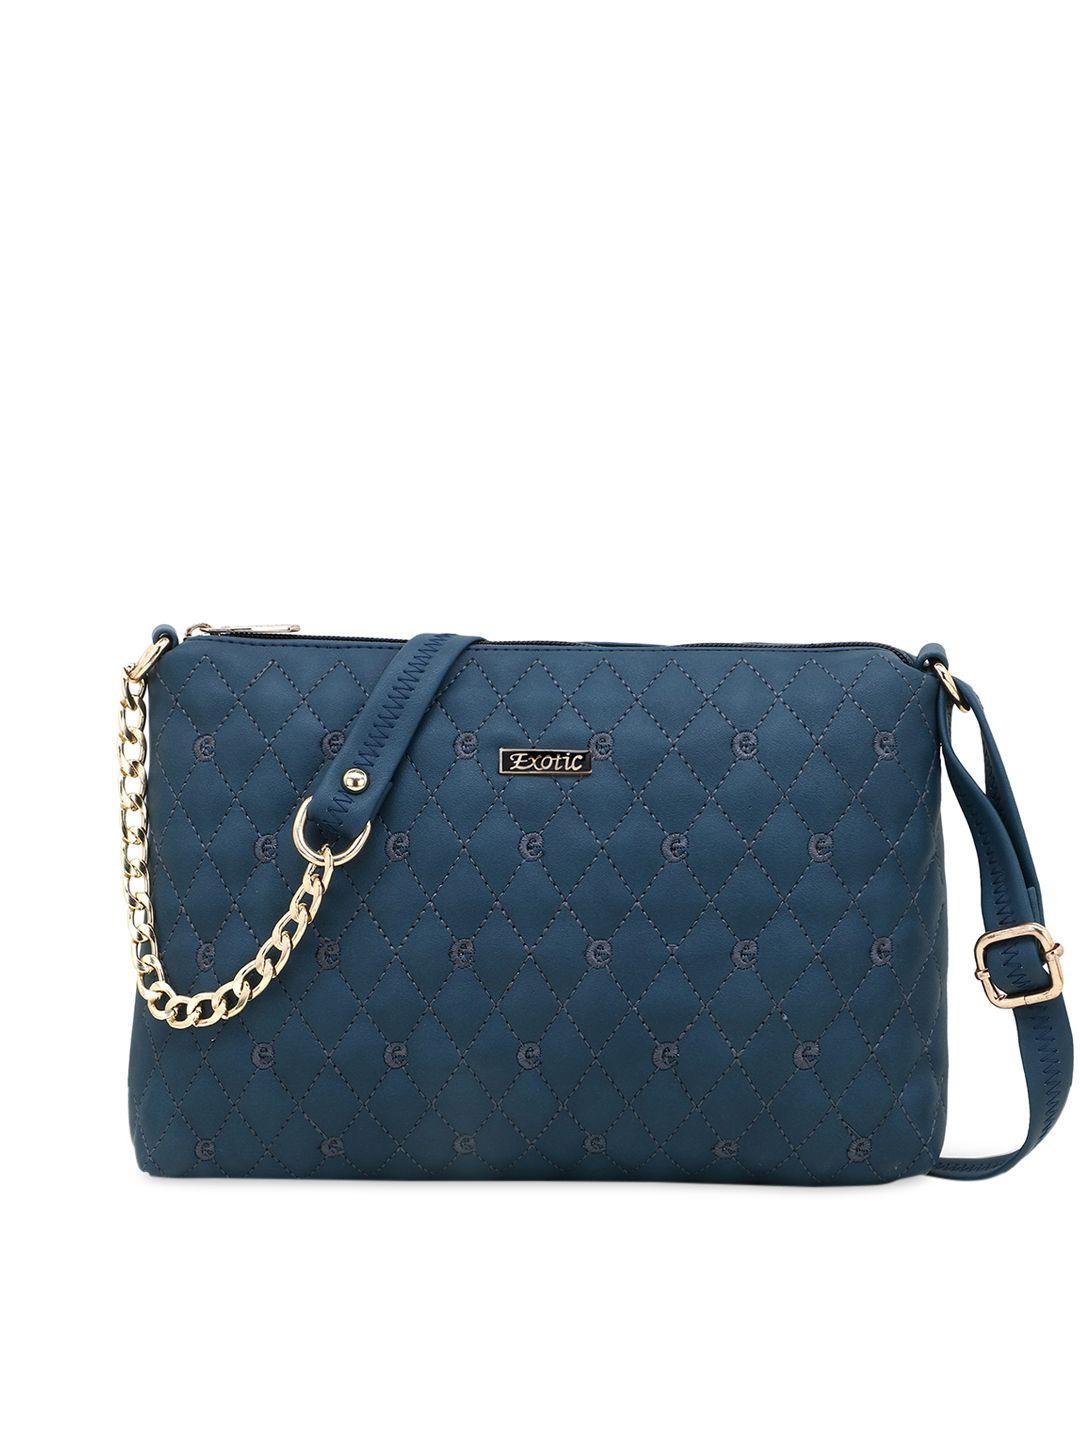 exotic blue textured pu structured sling bag with quilted